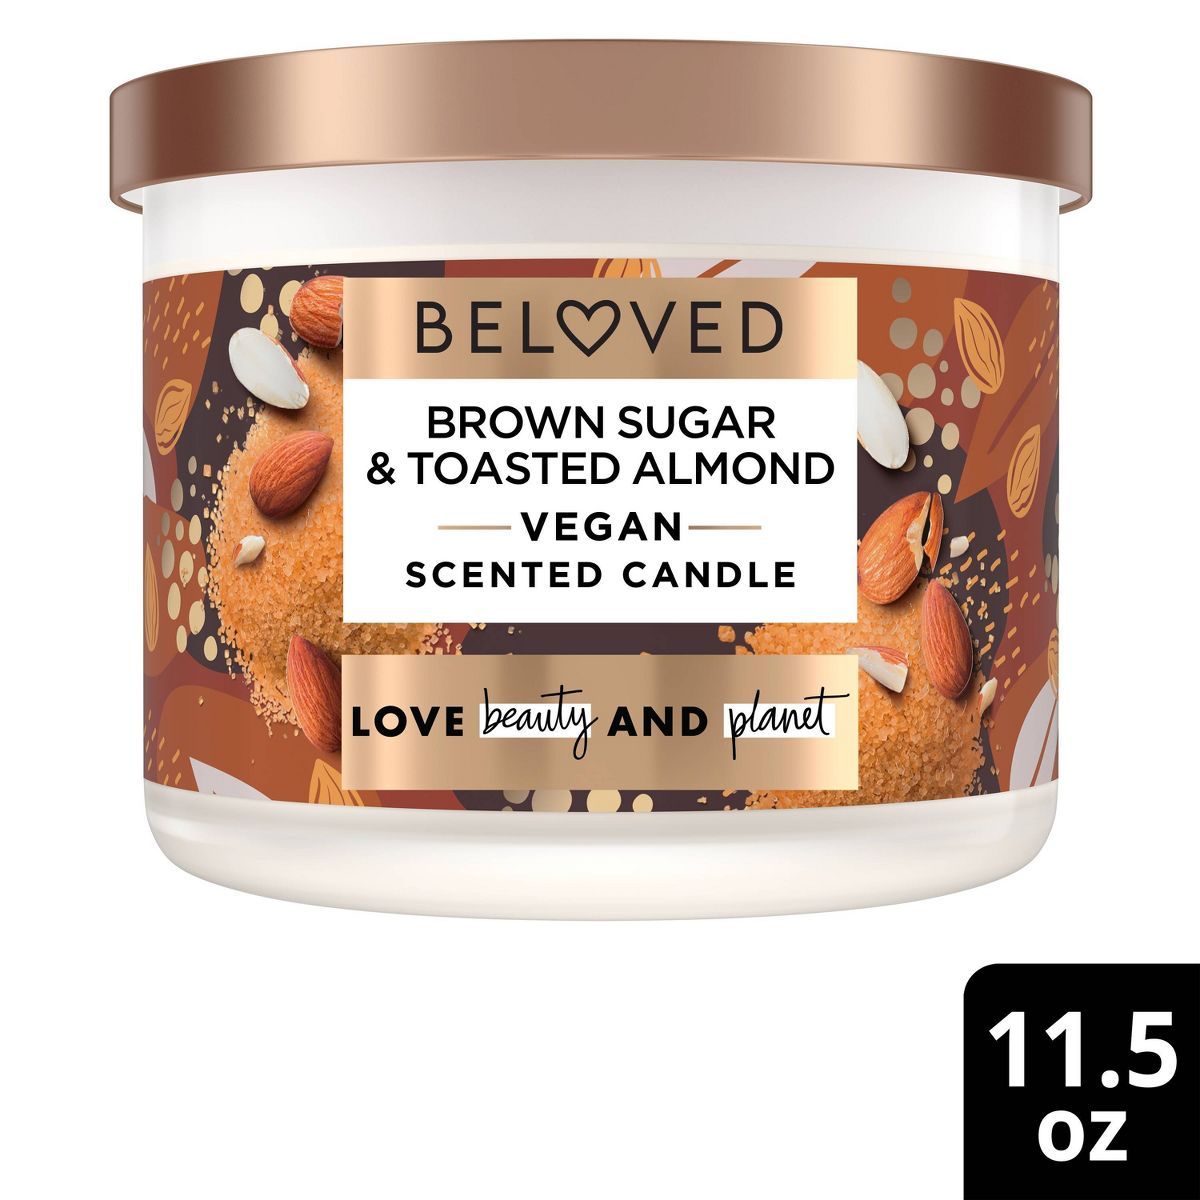 Beloved Brown Sugar and Toasted Almond 2-Wick Candle - 11.5oz | Target